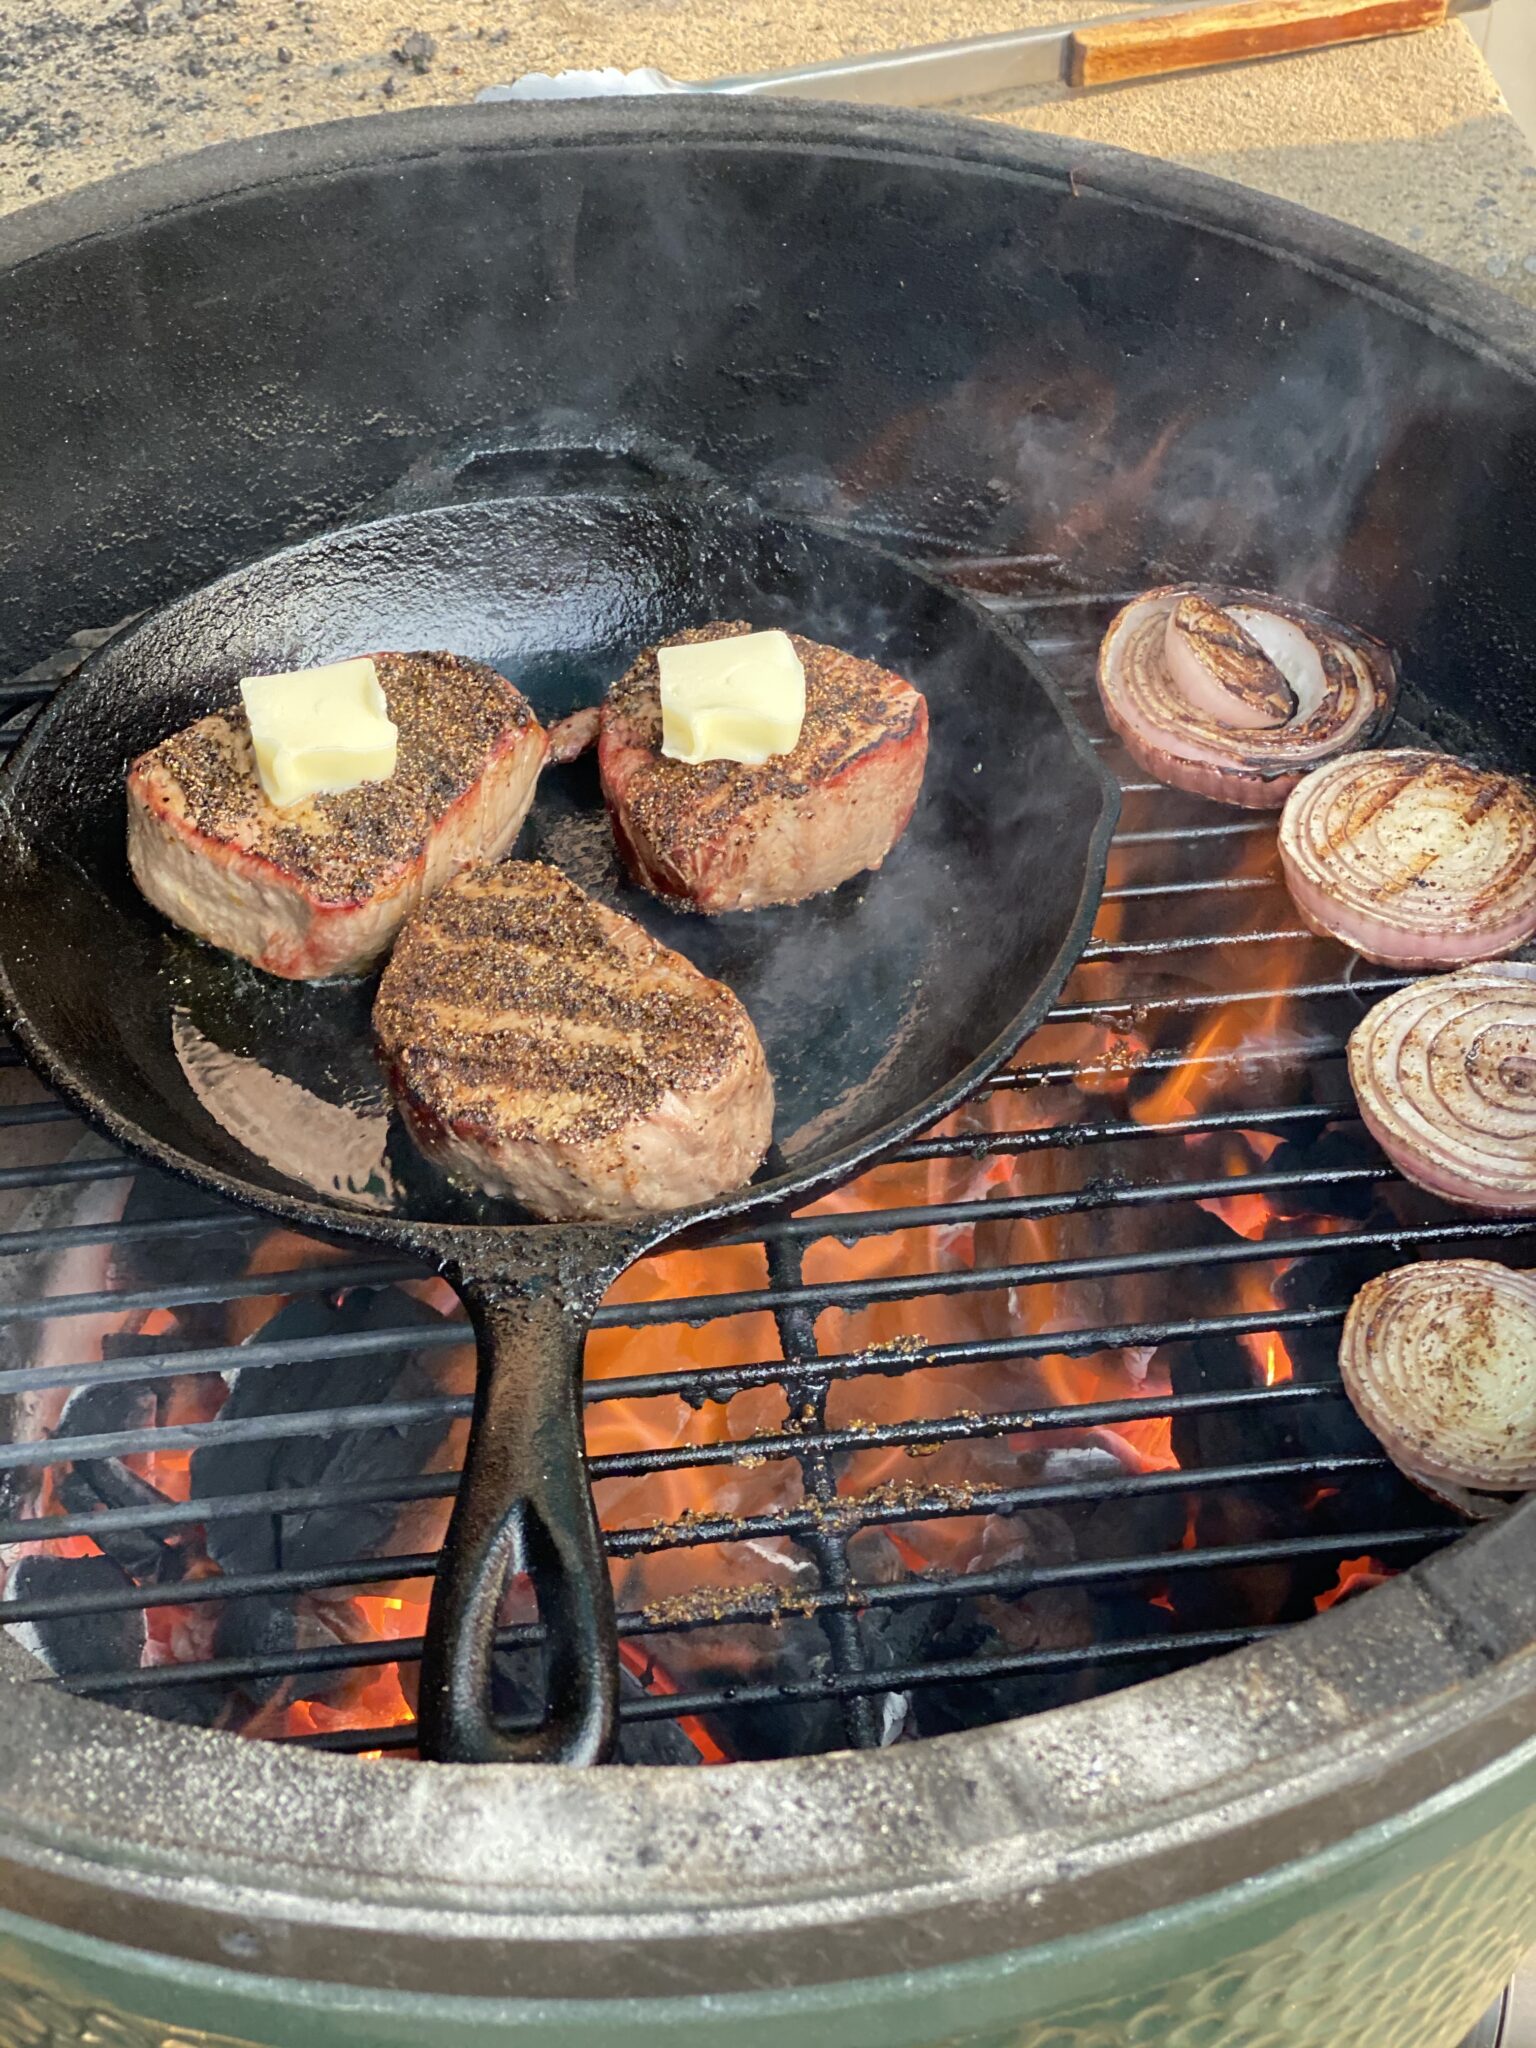 steaks in a cast iron skillet with butter on them on a grill with fire and onions